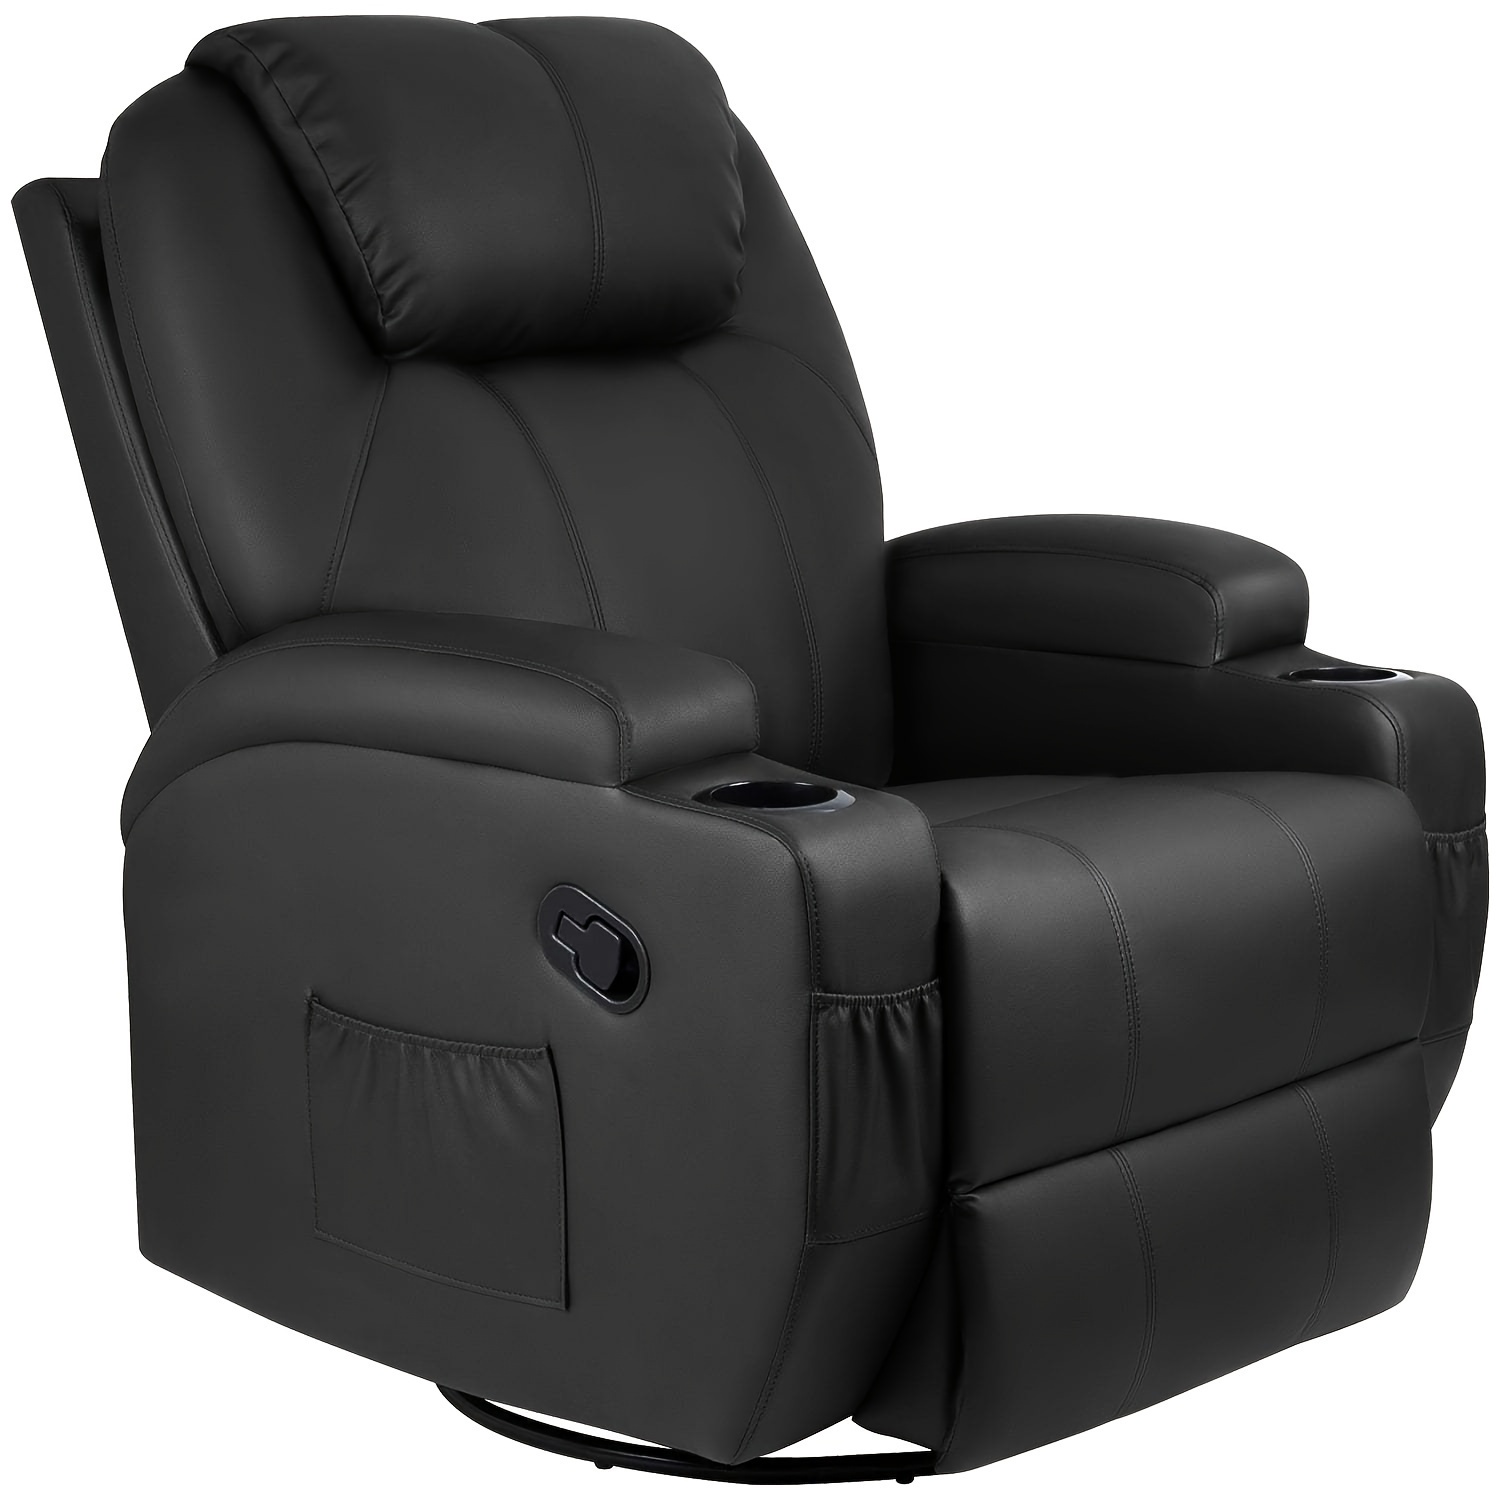 

1pc Luxury Heated Recliner Chair With Massage, 360-degree Swivel Rocker Recliner For Living Room, Home Theater Seating, Other Materials, 41x32x32.5 Inches